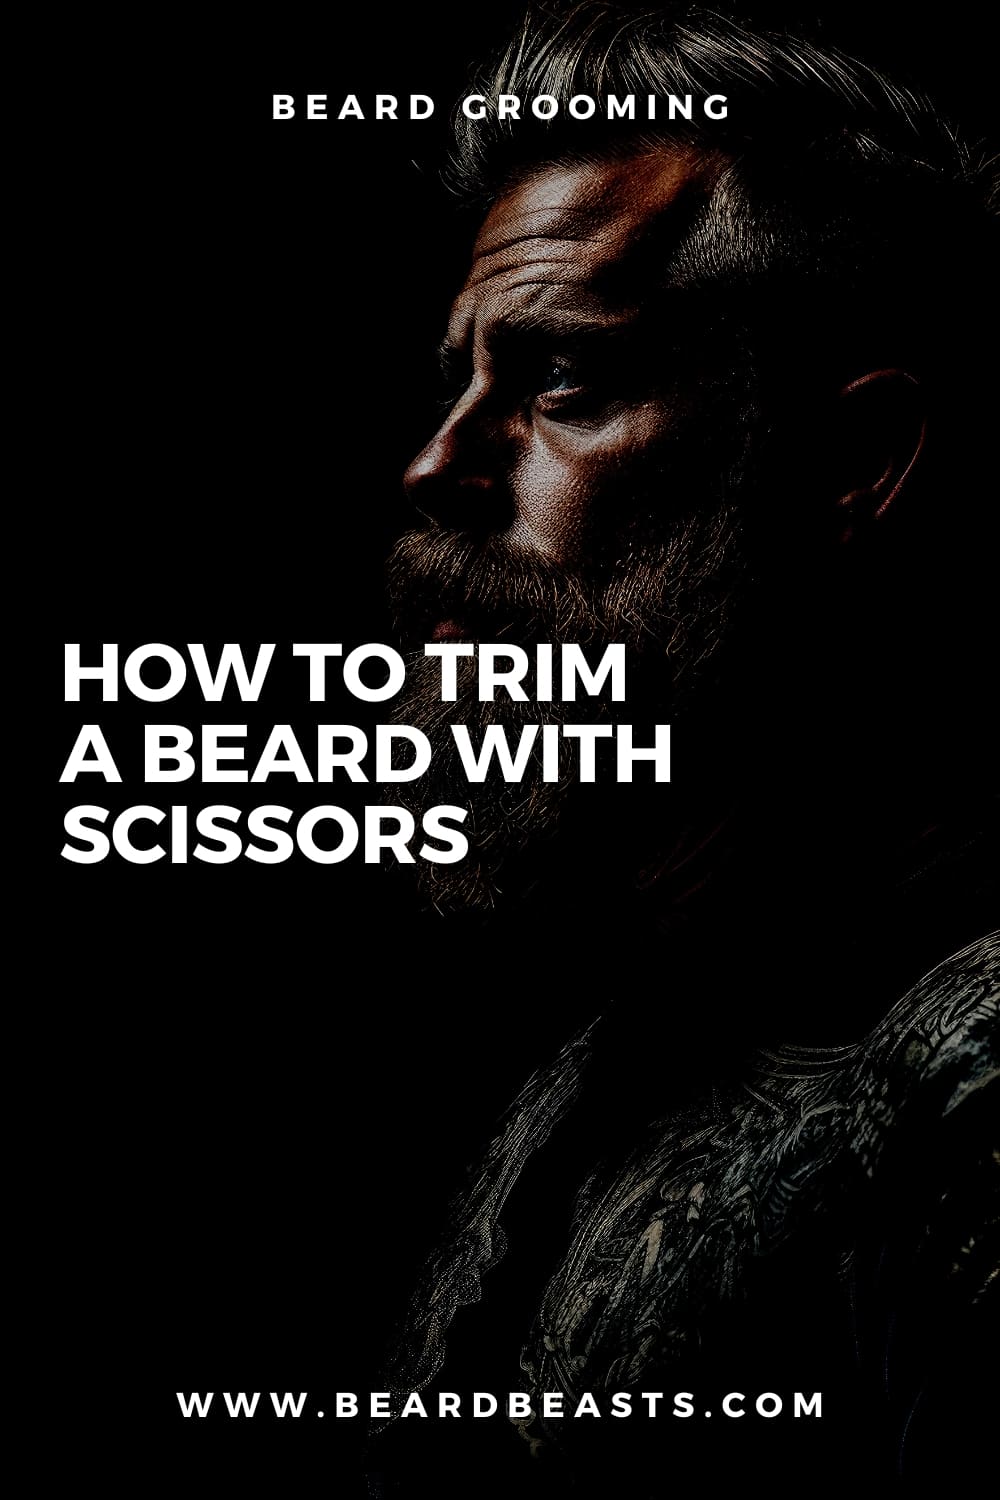 Promotional pin for a beard grooming article featuring a close-up side profile of a man with a meticulously groomed beard and haircut. The text overlay in bold white font reads 'BEARD GROOMING - HOW TO TRIM A BEARD WITH SCISSORS' followed by the website 'WWW.BEARDBEASTS.COM' at the bottom.